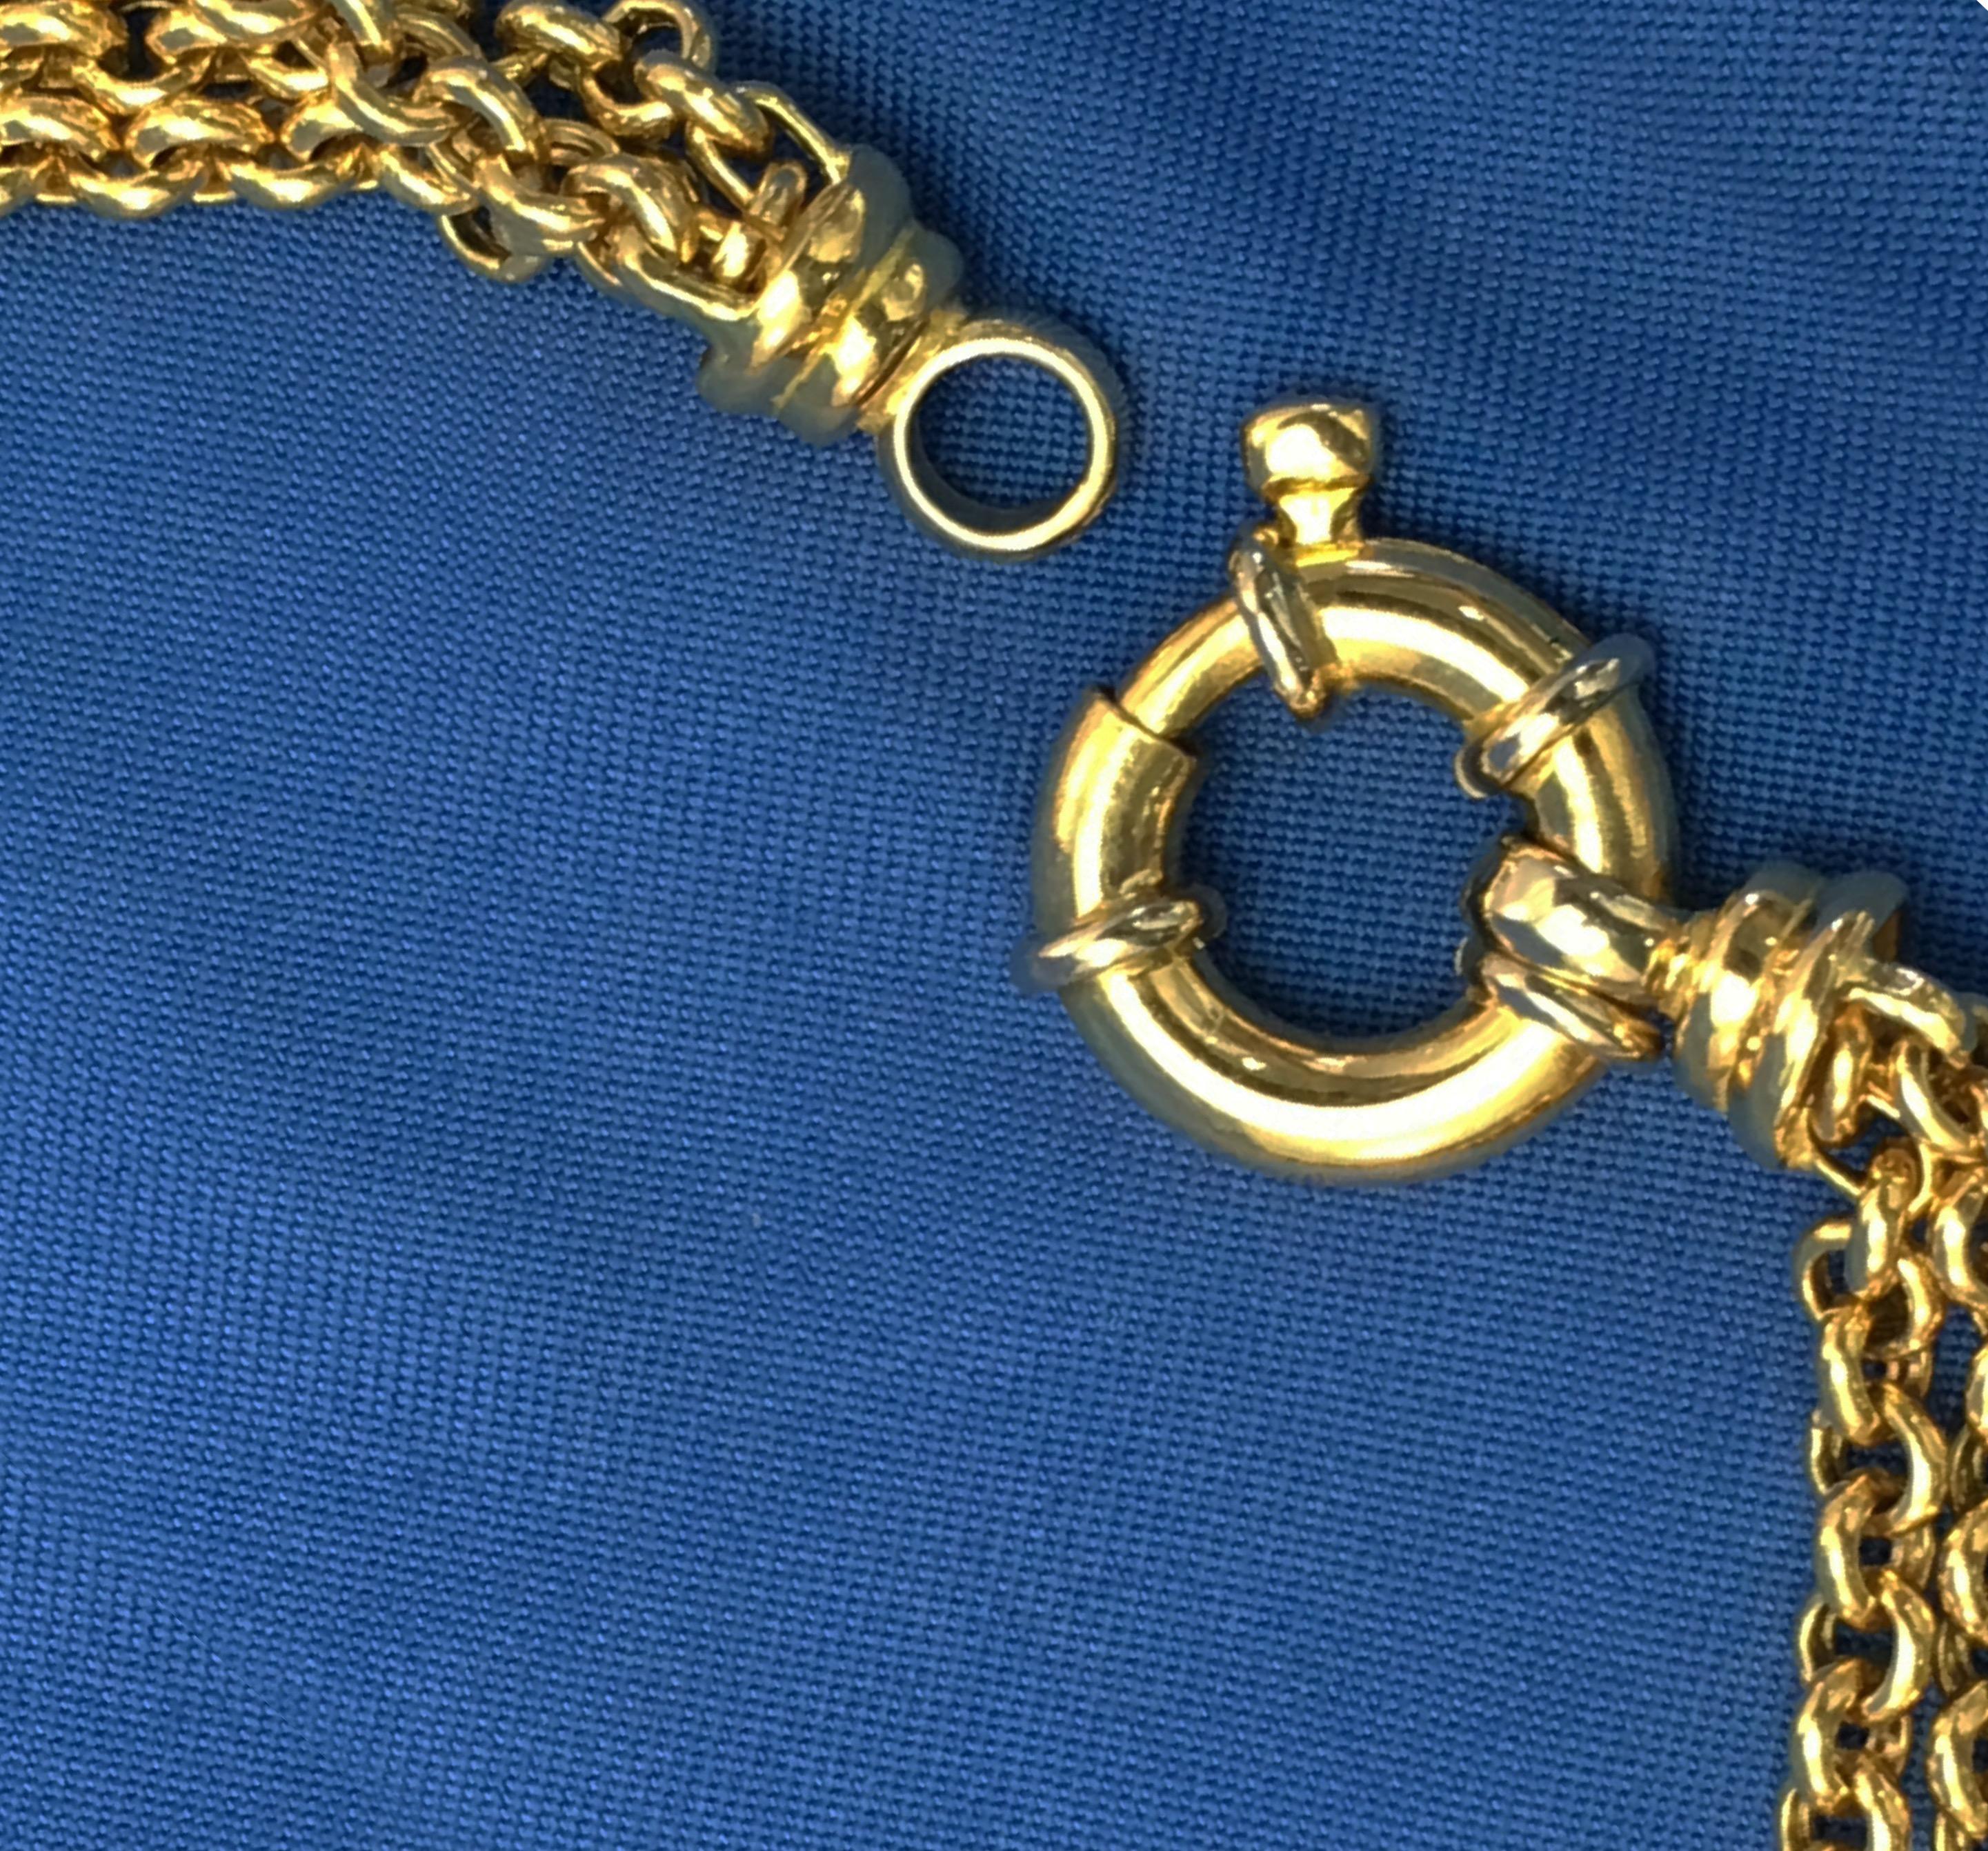 Choker Length Triple Rolo Chain with Bolt Ring Closure in 18 Karat Yellow Gold 1